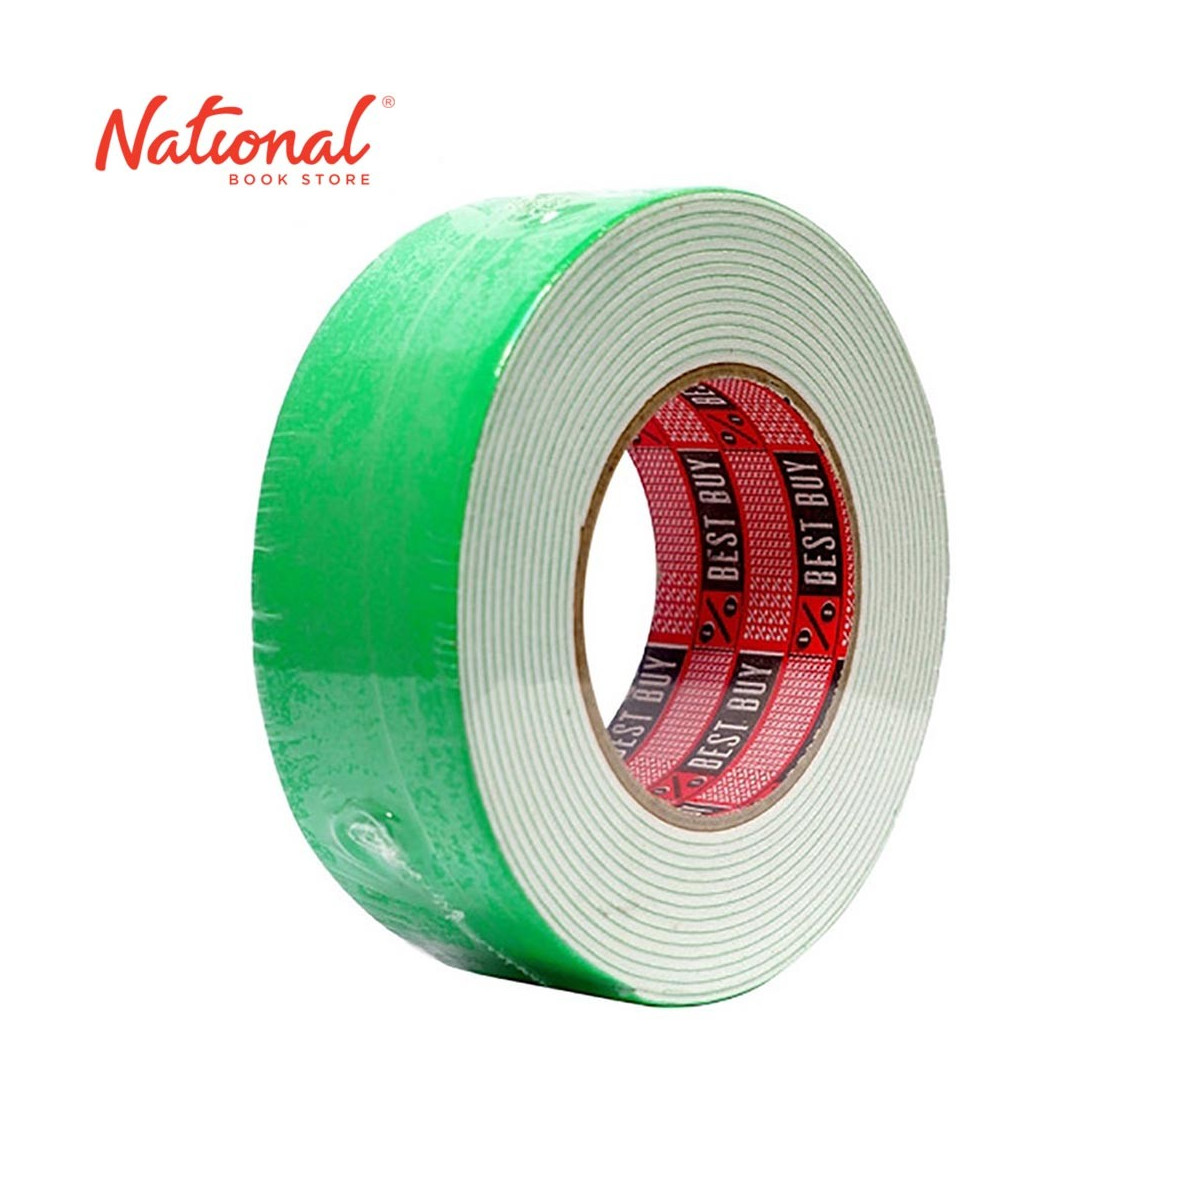 3m double sided tape strongest